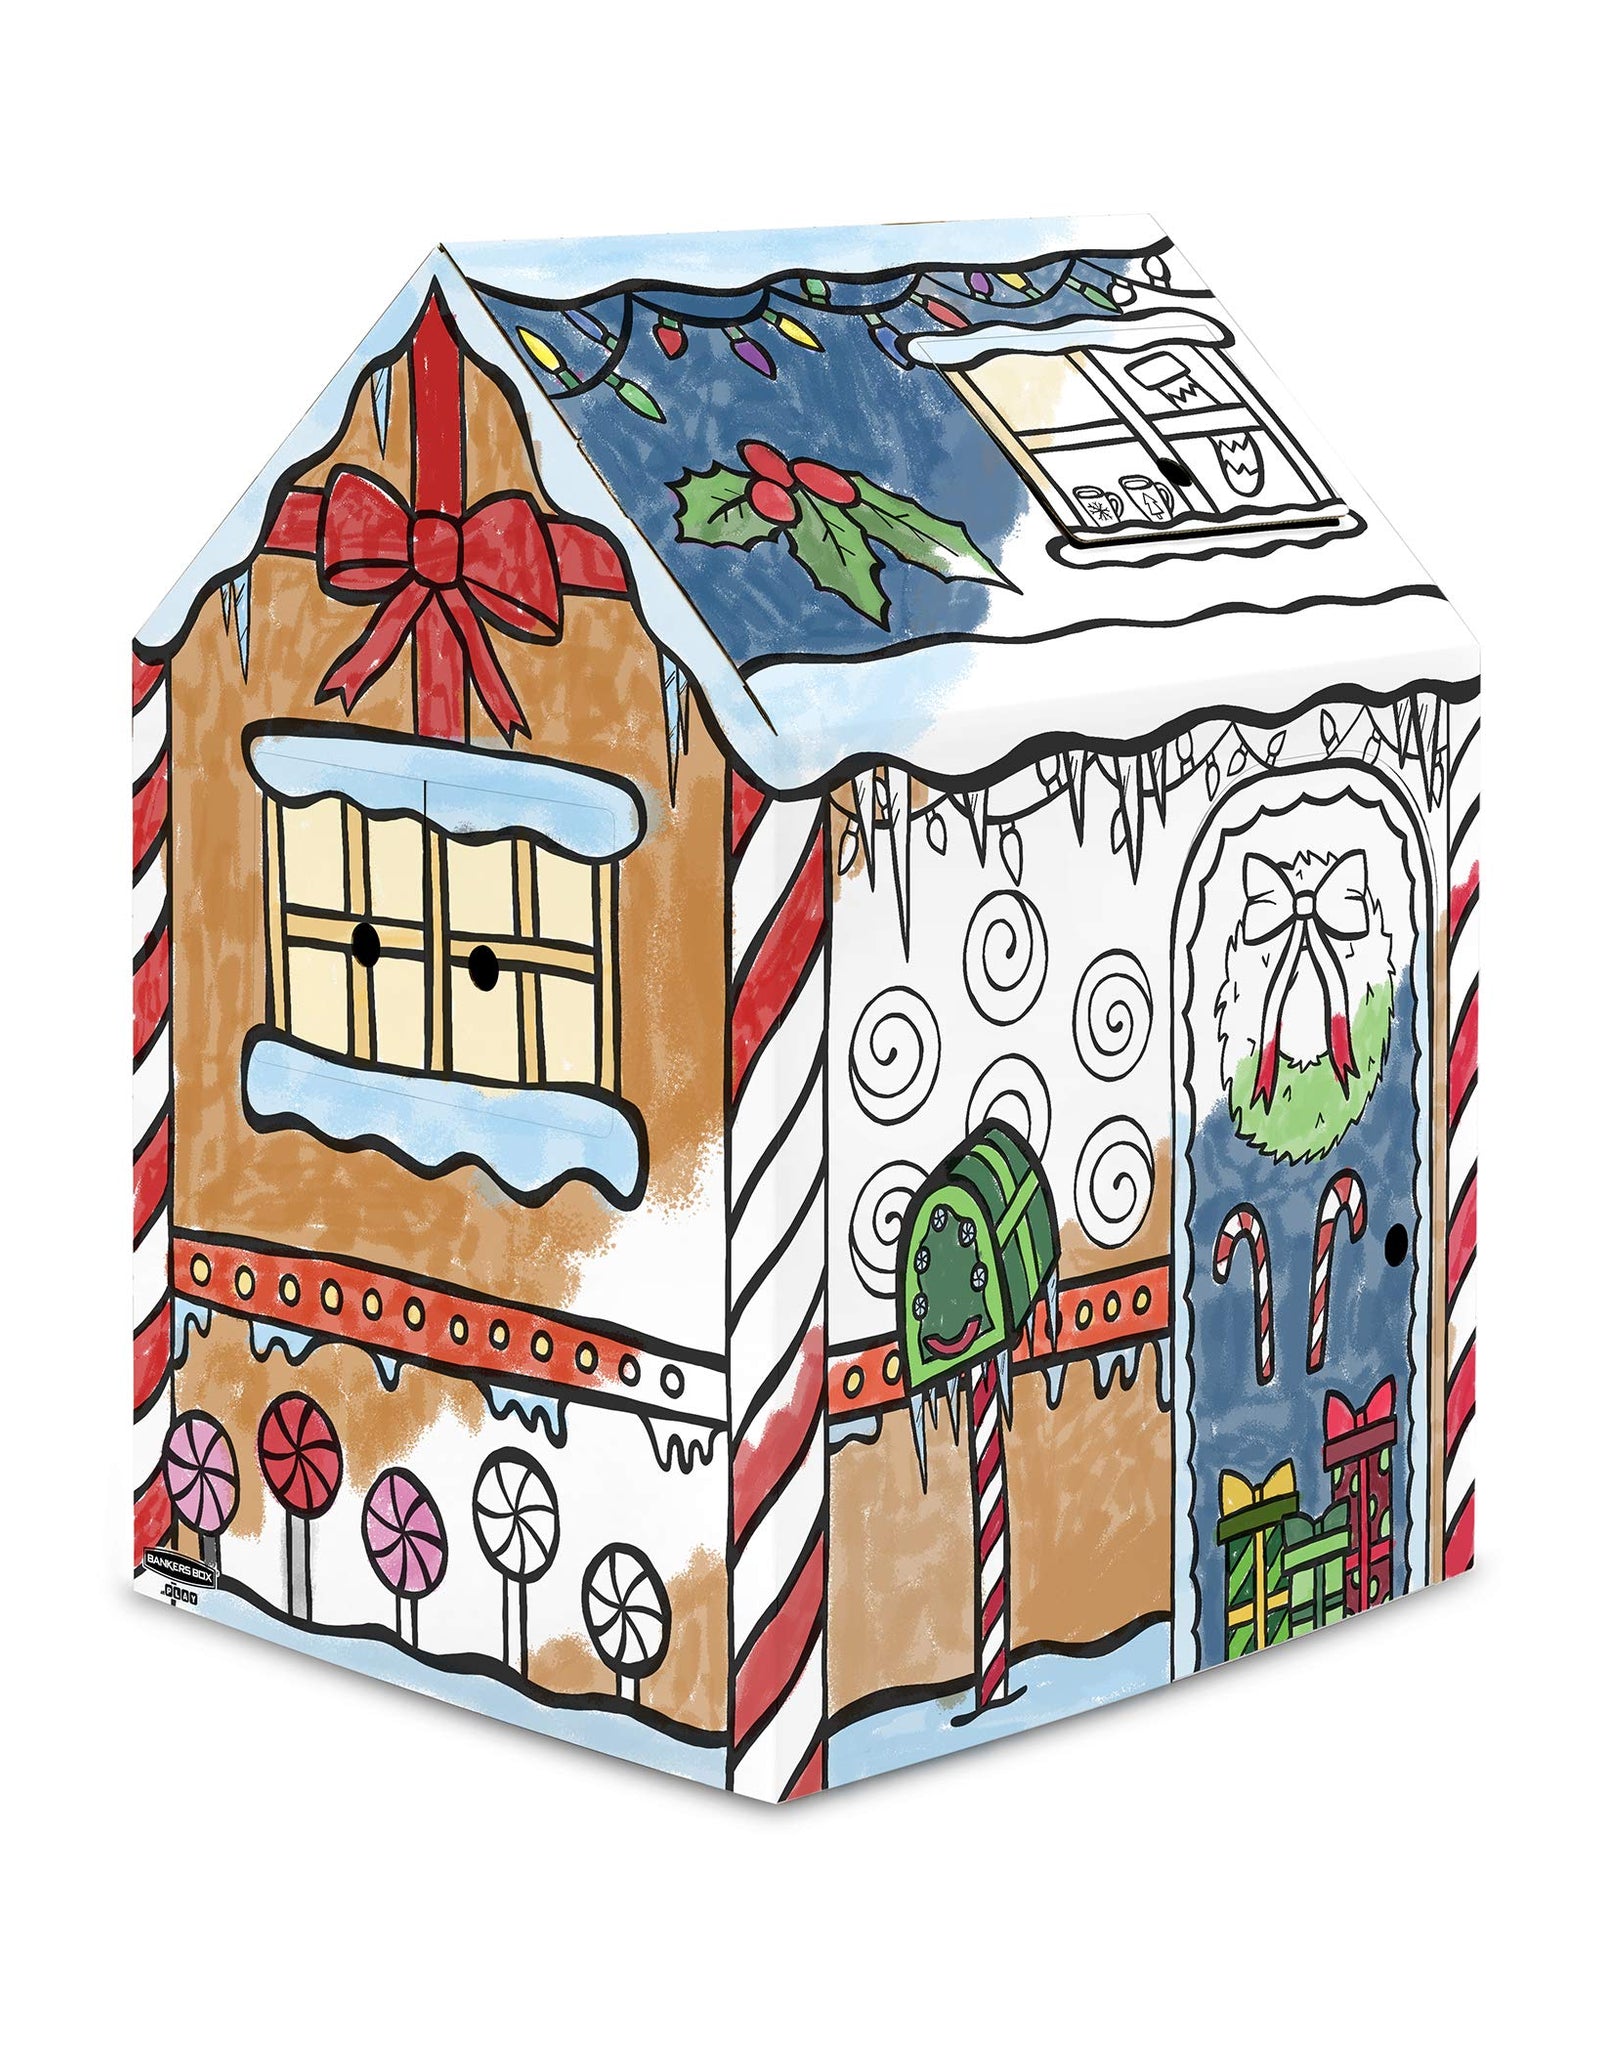 Bankers Box at Play Gingerbread Playhouse, Cardboard Playhouse and Craft Activity for Kids